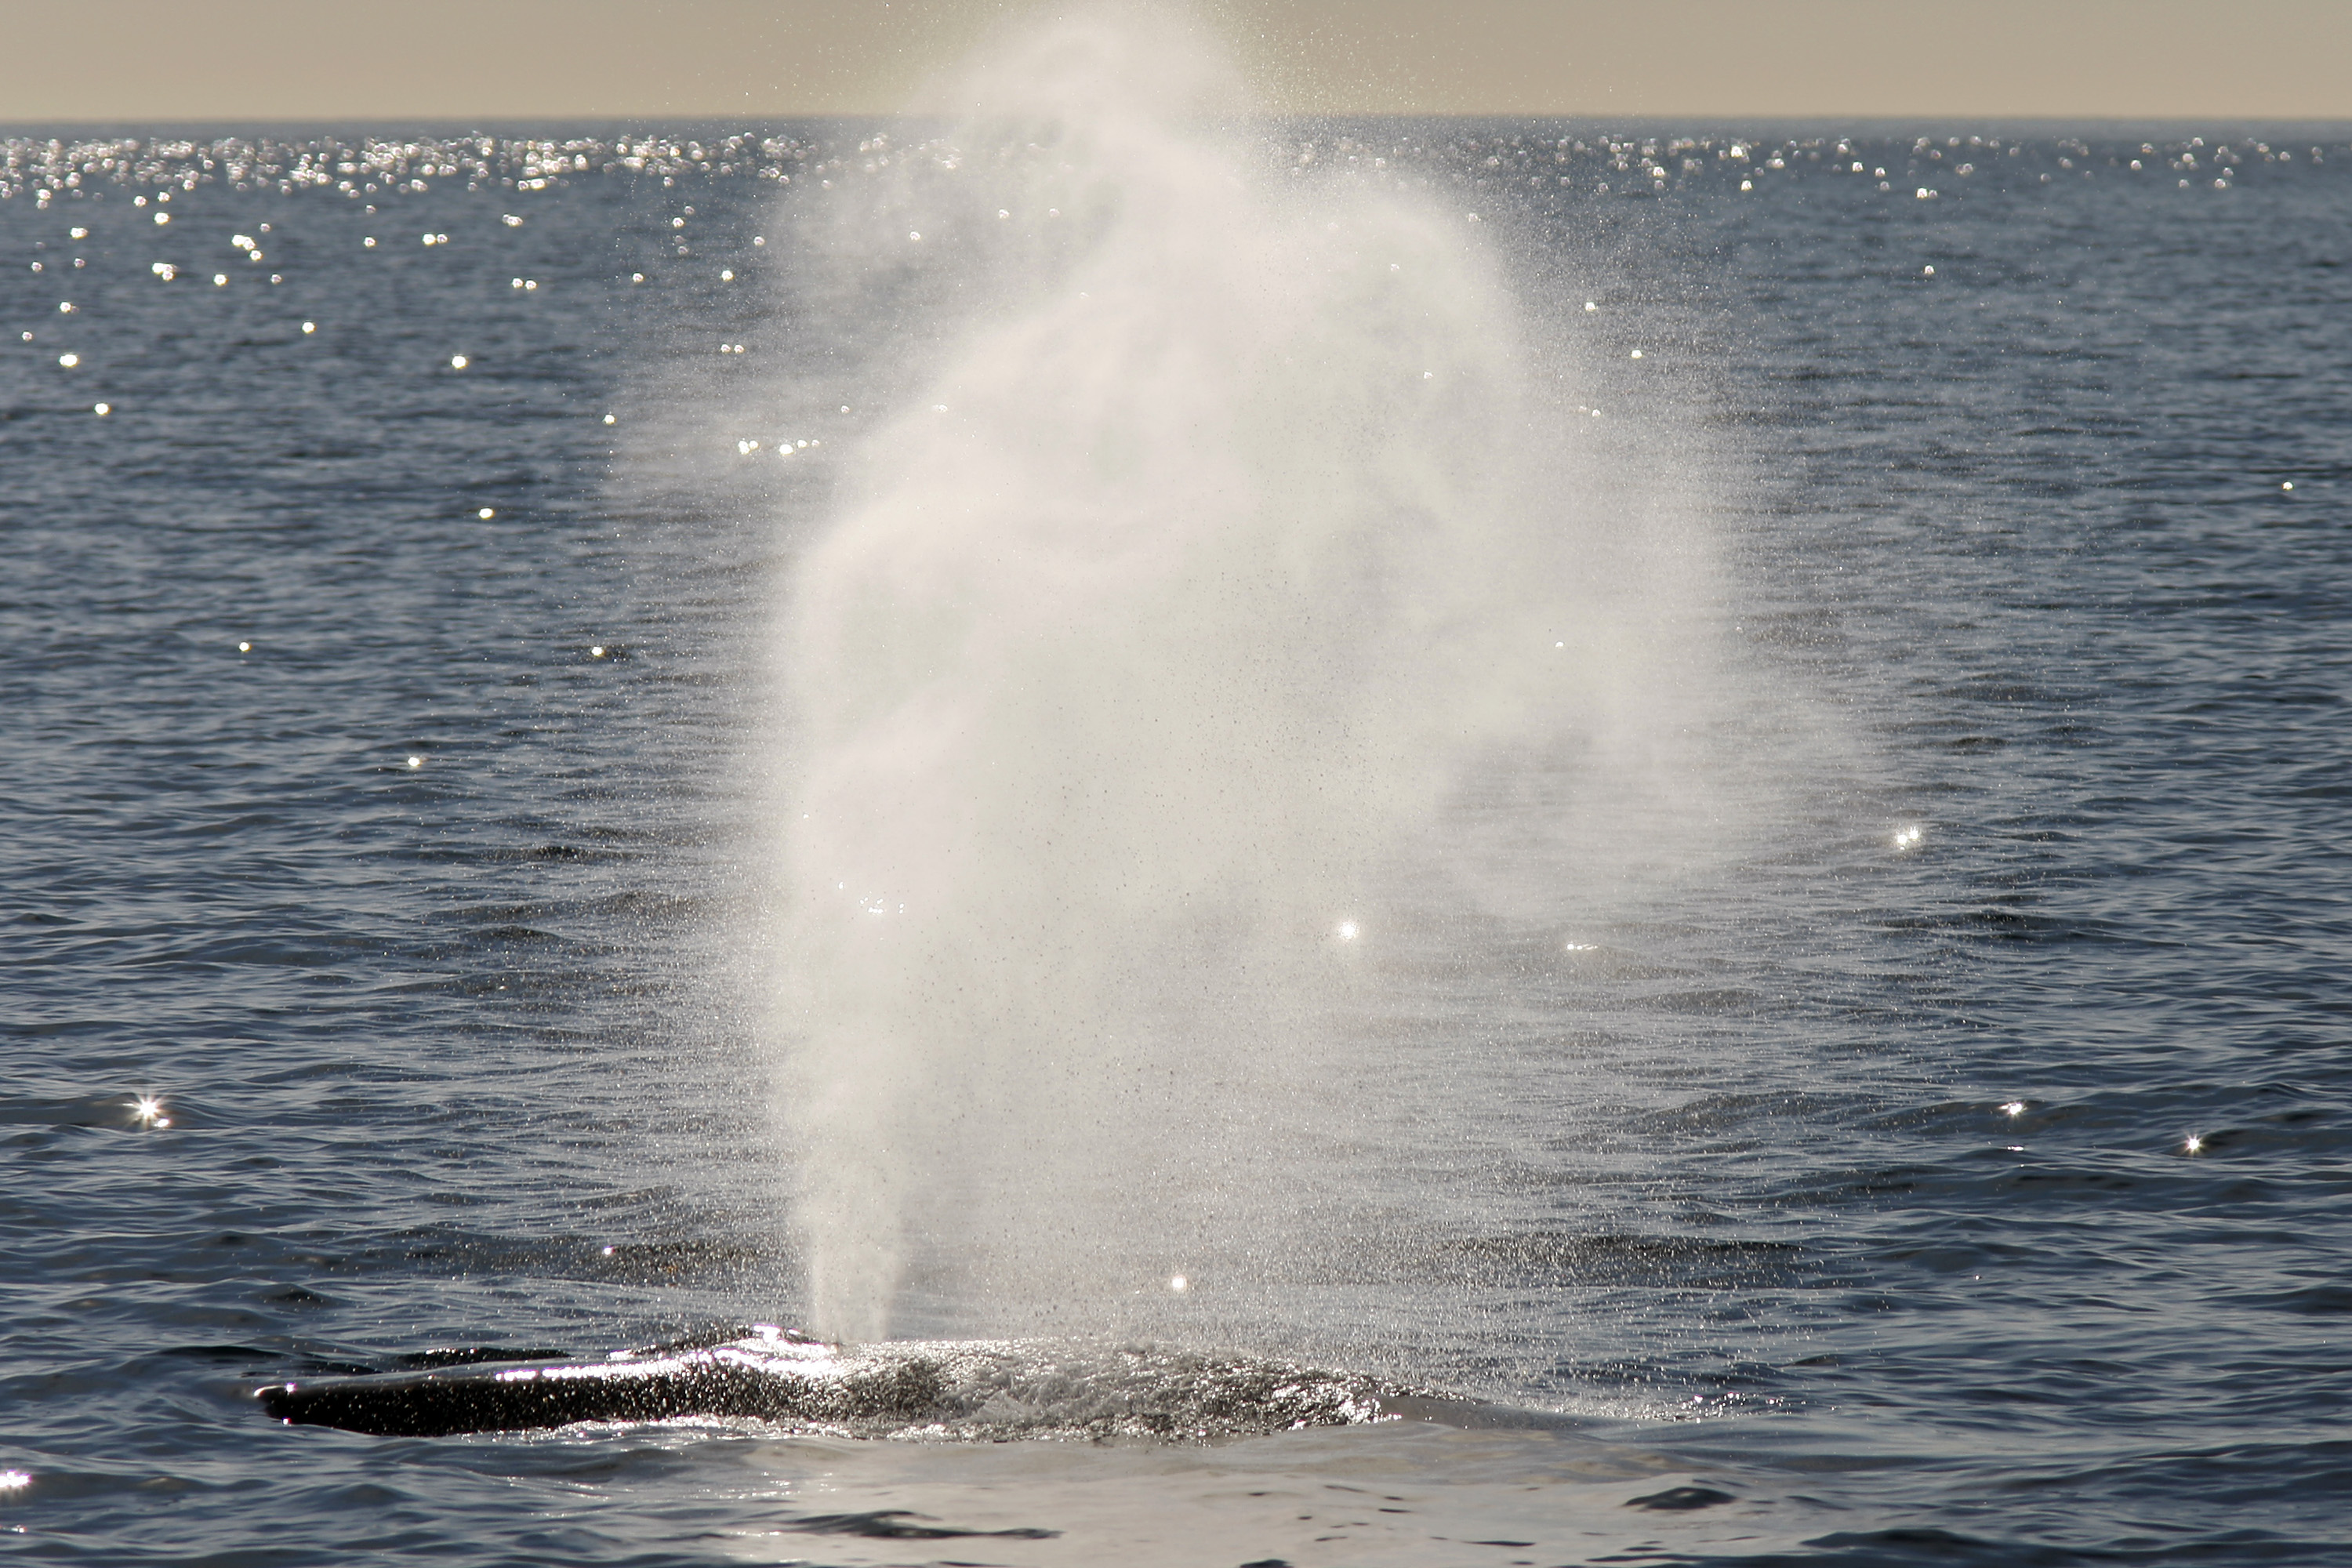 A fin whale spouts off the southern California coast on January 29, 2012 near Long Beach, California. (David McNew—Getty Images)